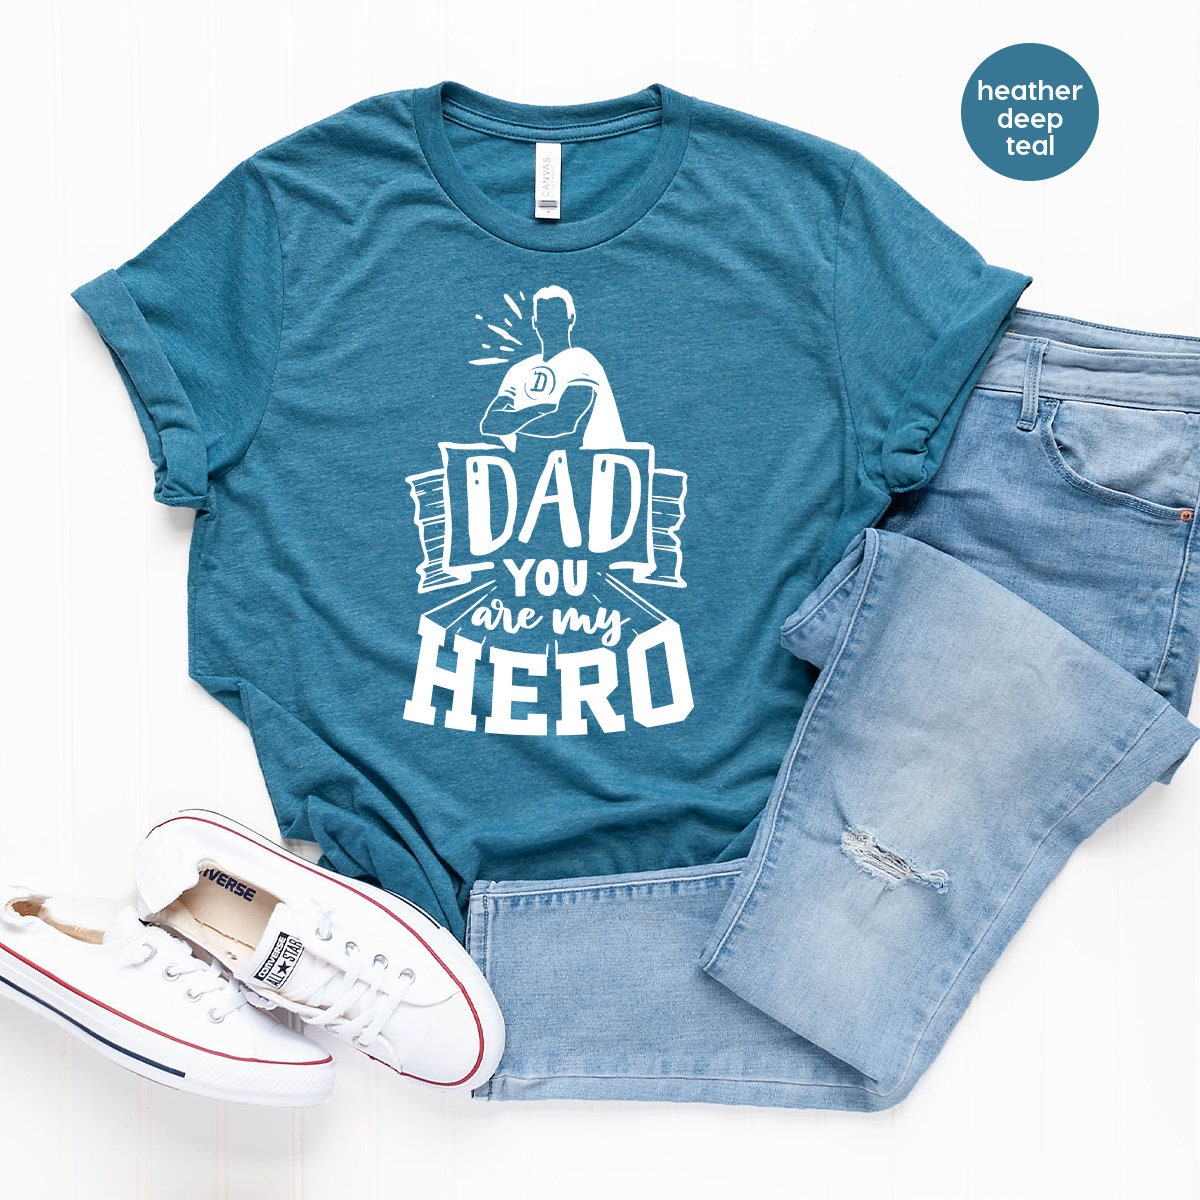 Dad Shirt, Daddy T Shirt, Dad You Are My Hero Shirt, Best Dad Ever T-Shirt, Gift For Dad, Funny Dad Shirt, Fatherhood Shirt, Dad Gift - Fastdeliverytees.com